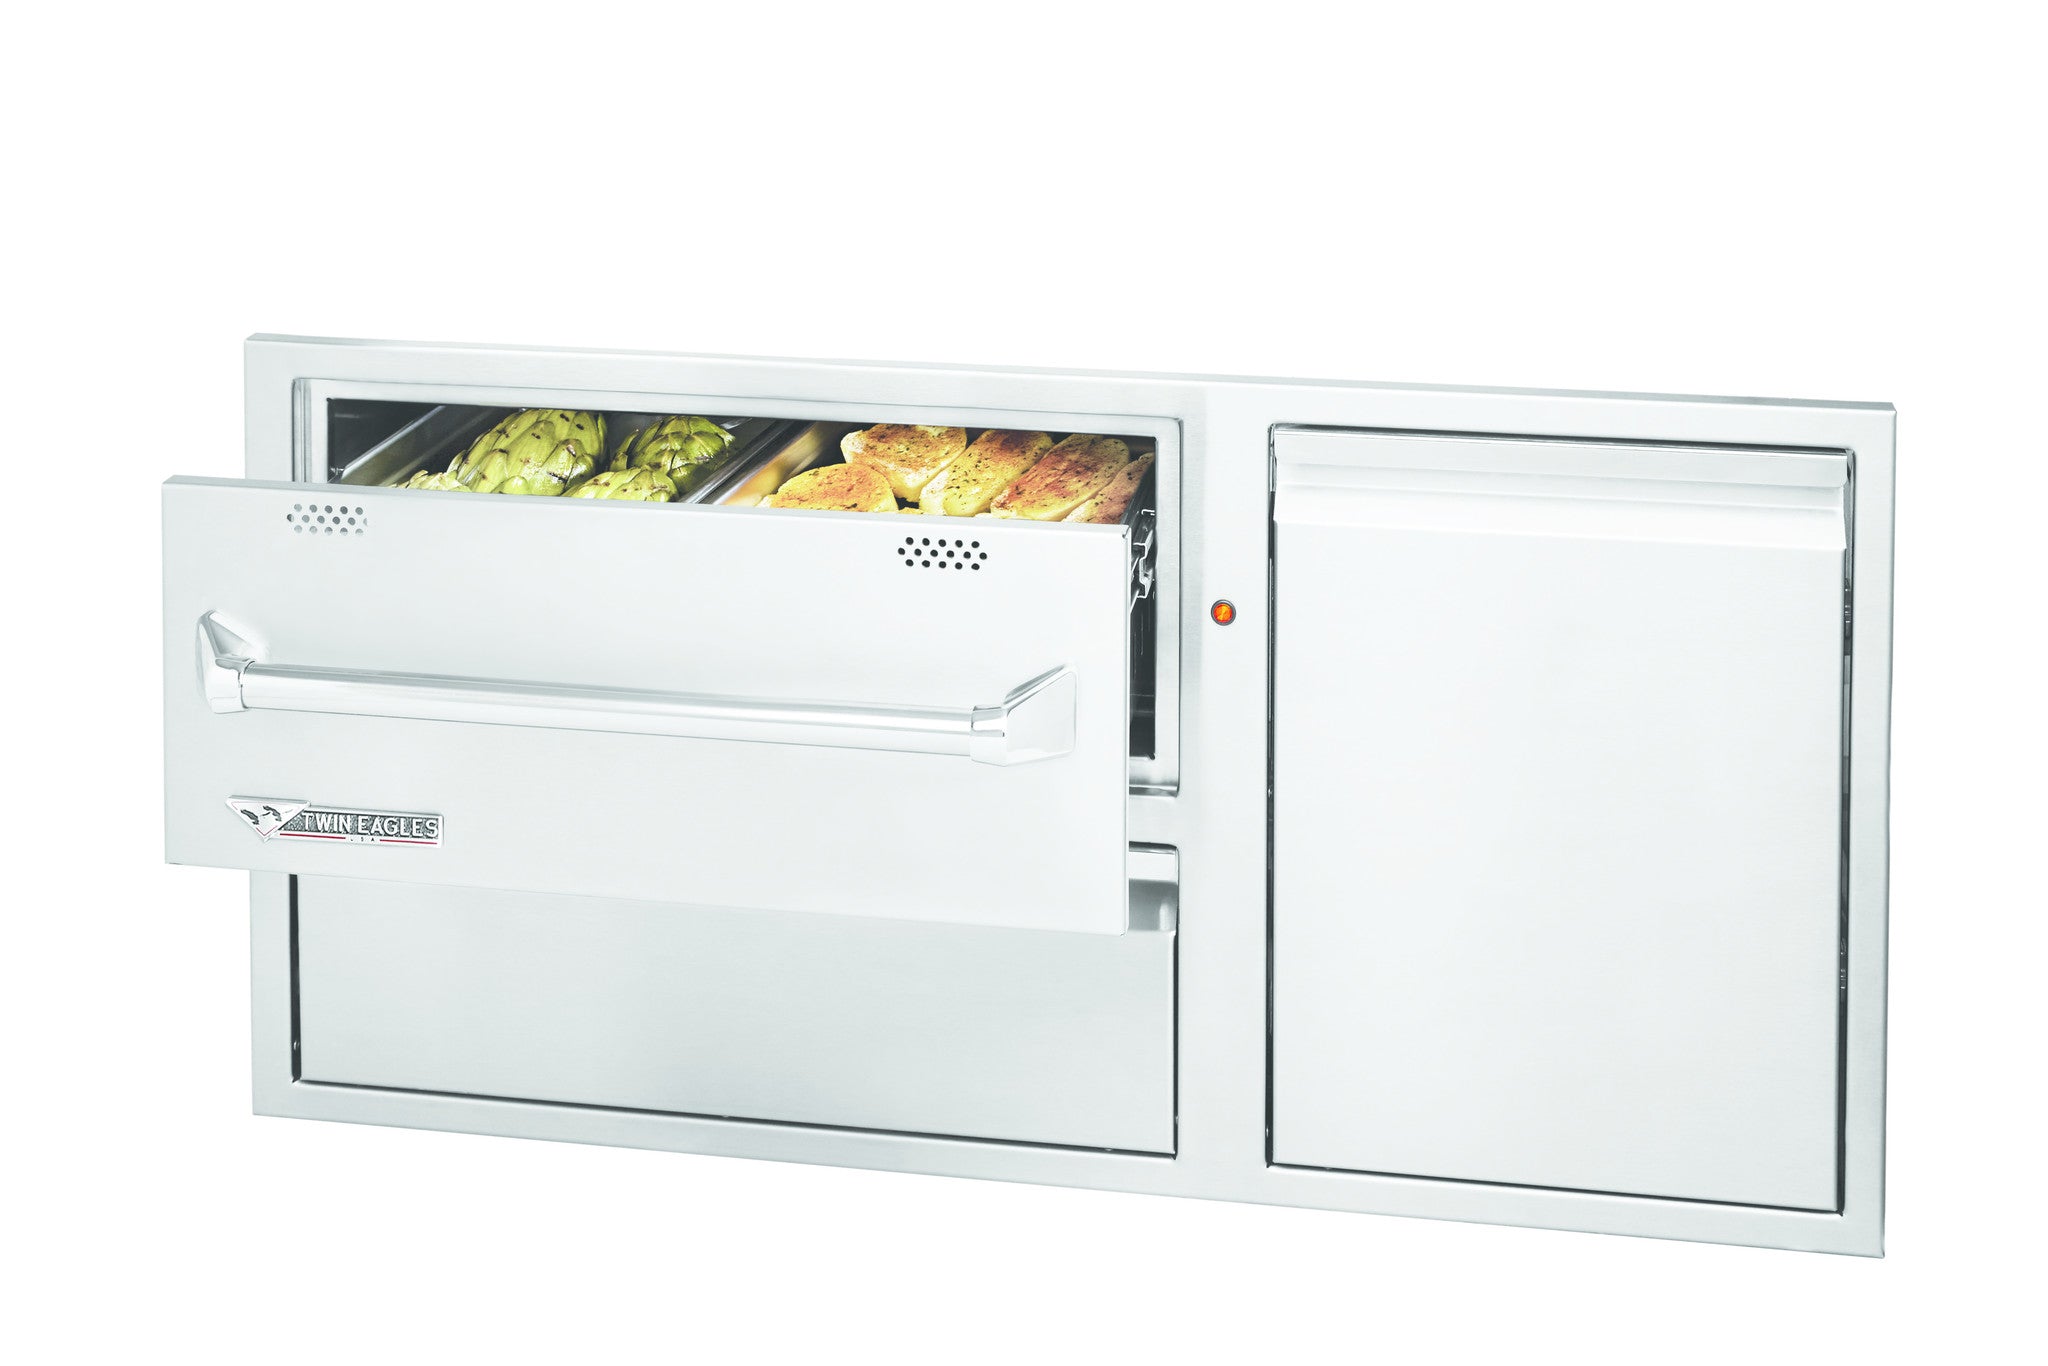 42" Twin Eagles Warming Drawer Combo